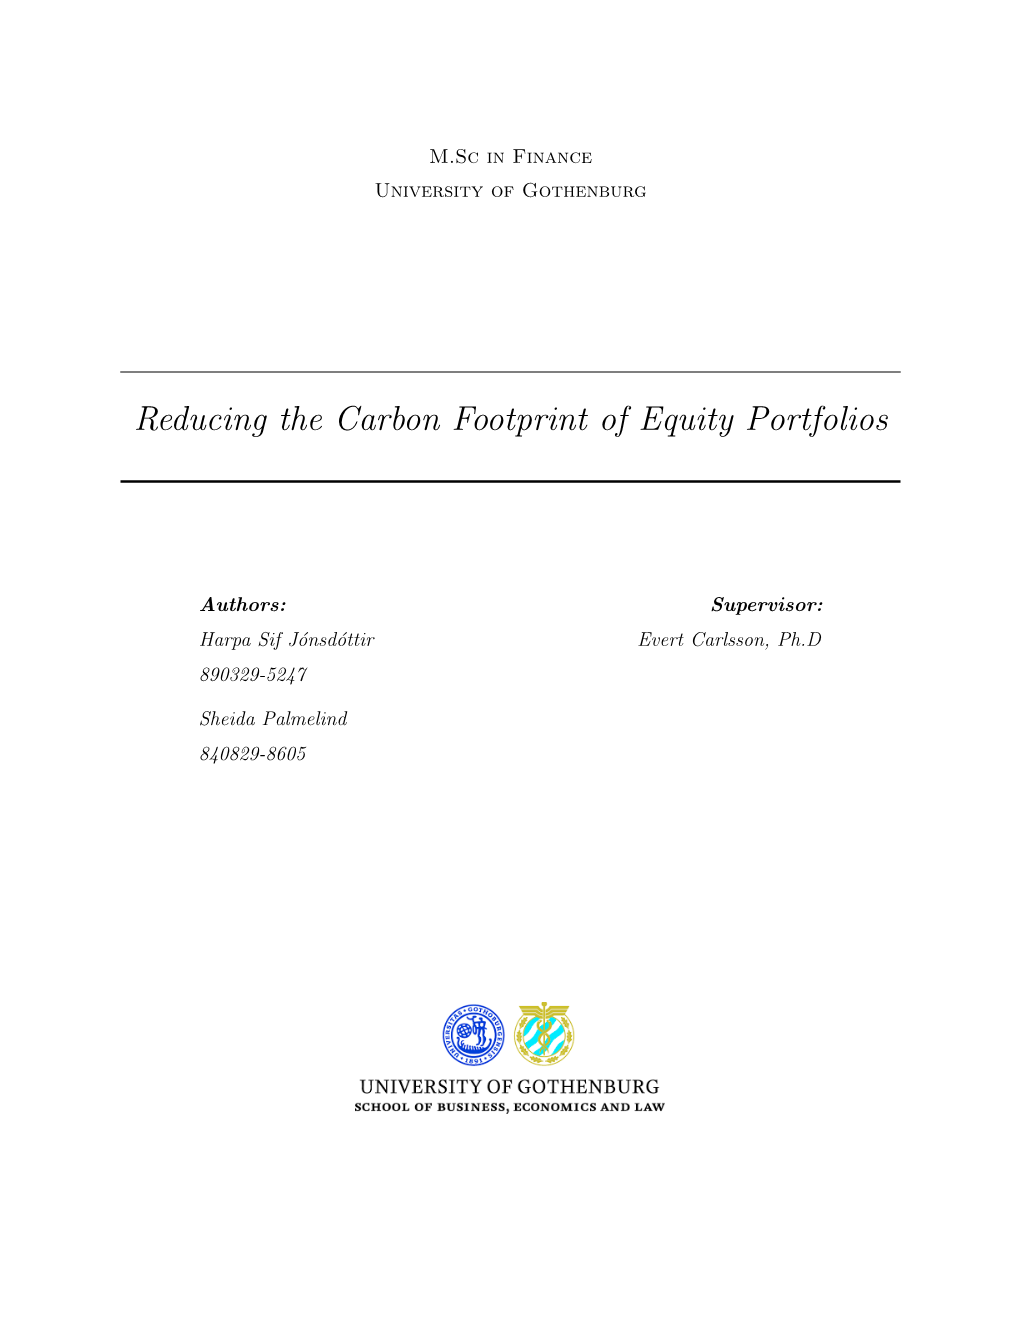 Reducing the Carbon Footprint of Equity Portfolios